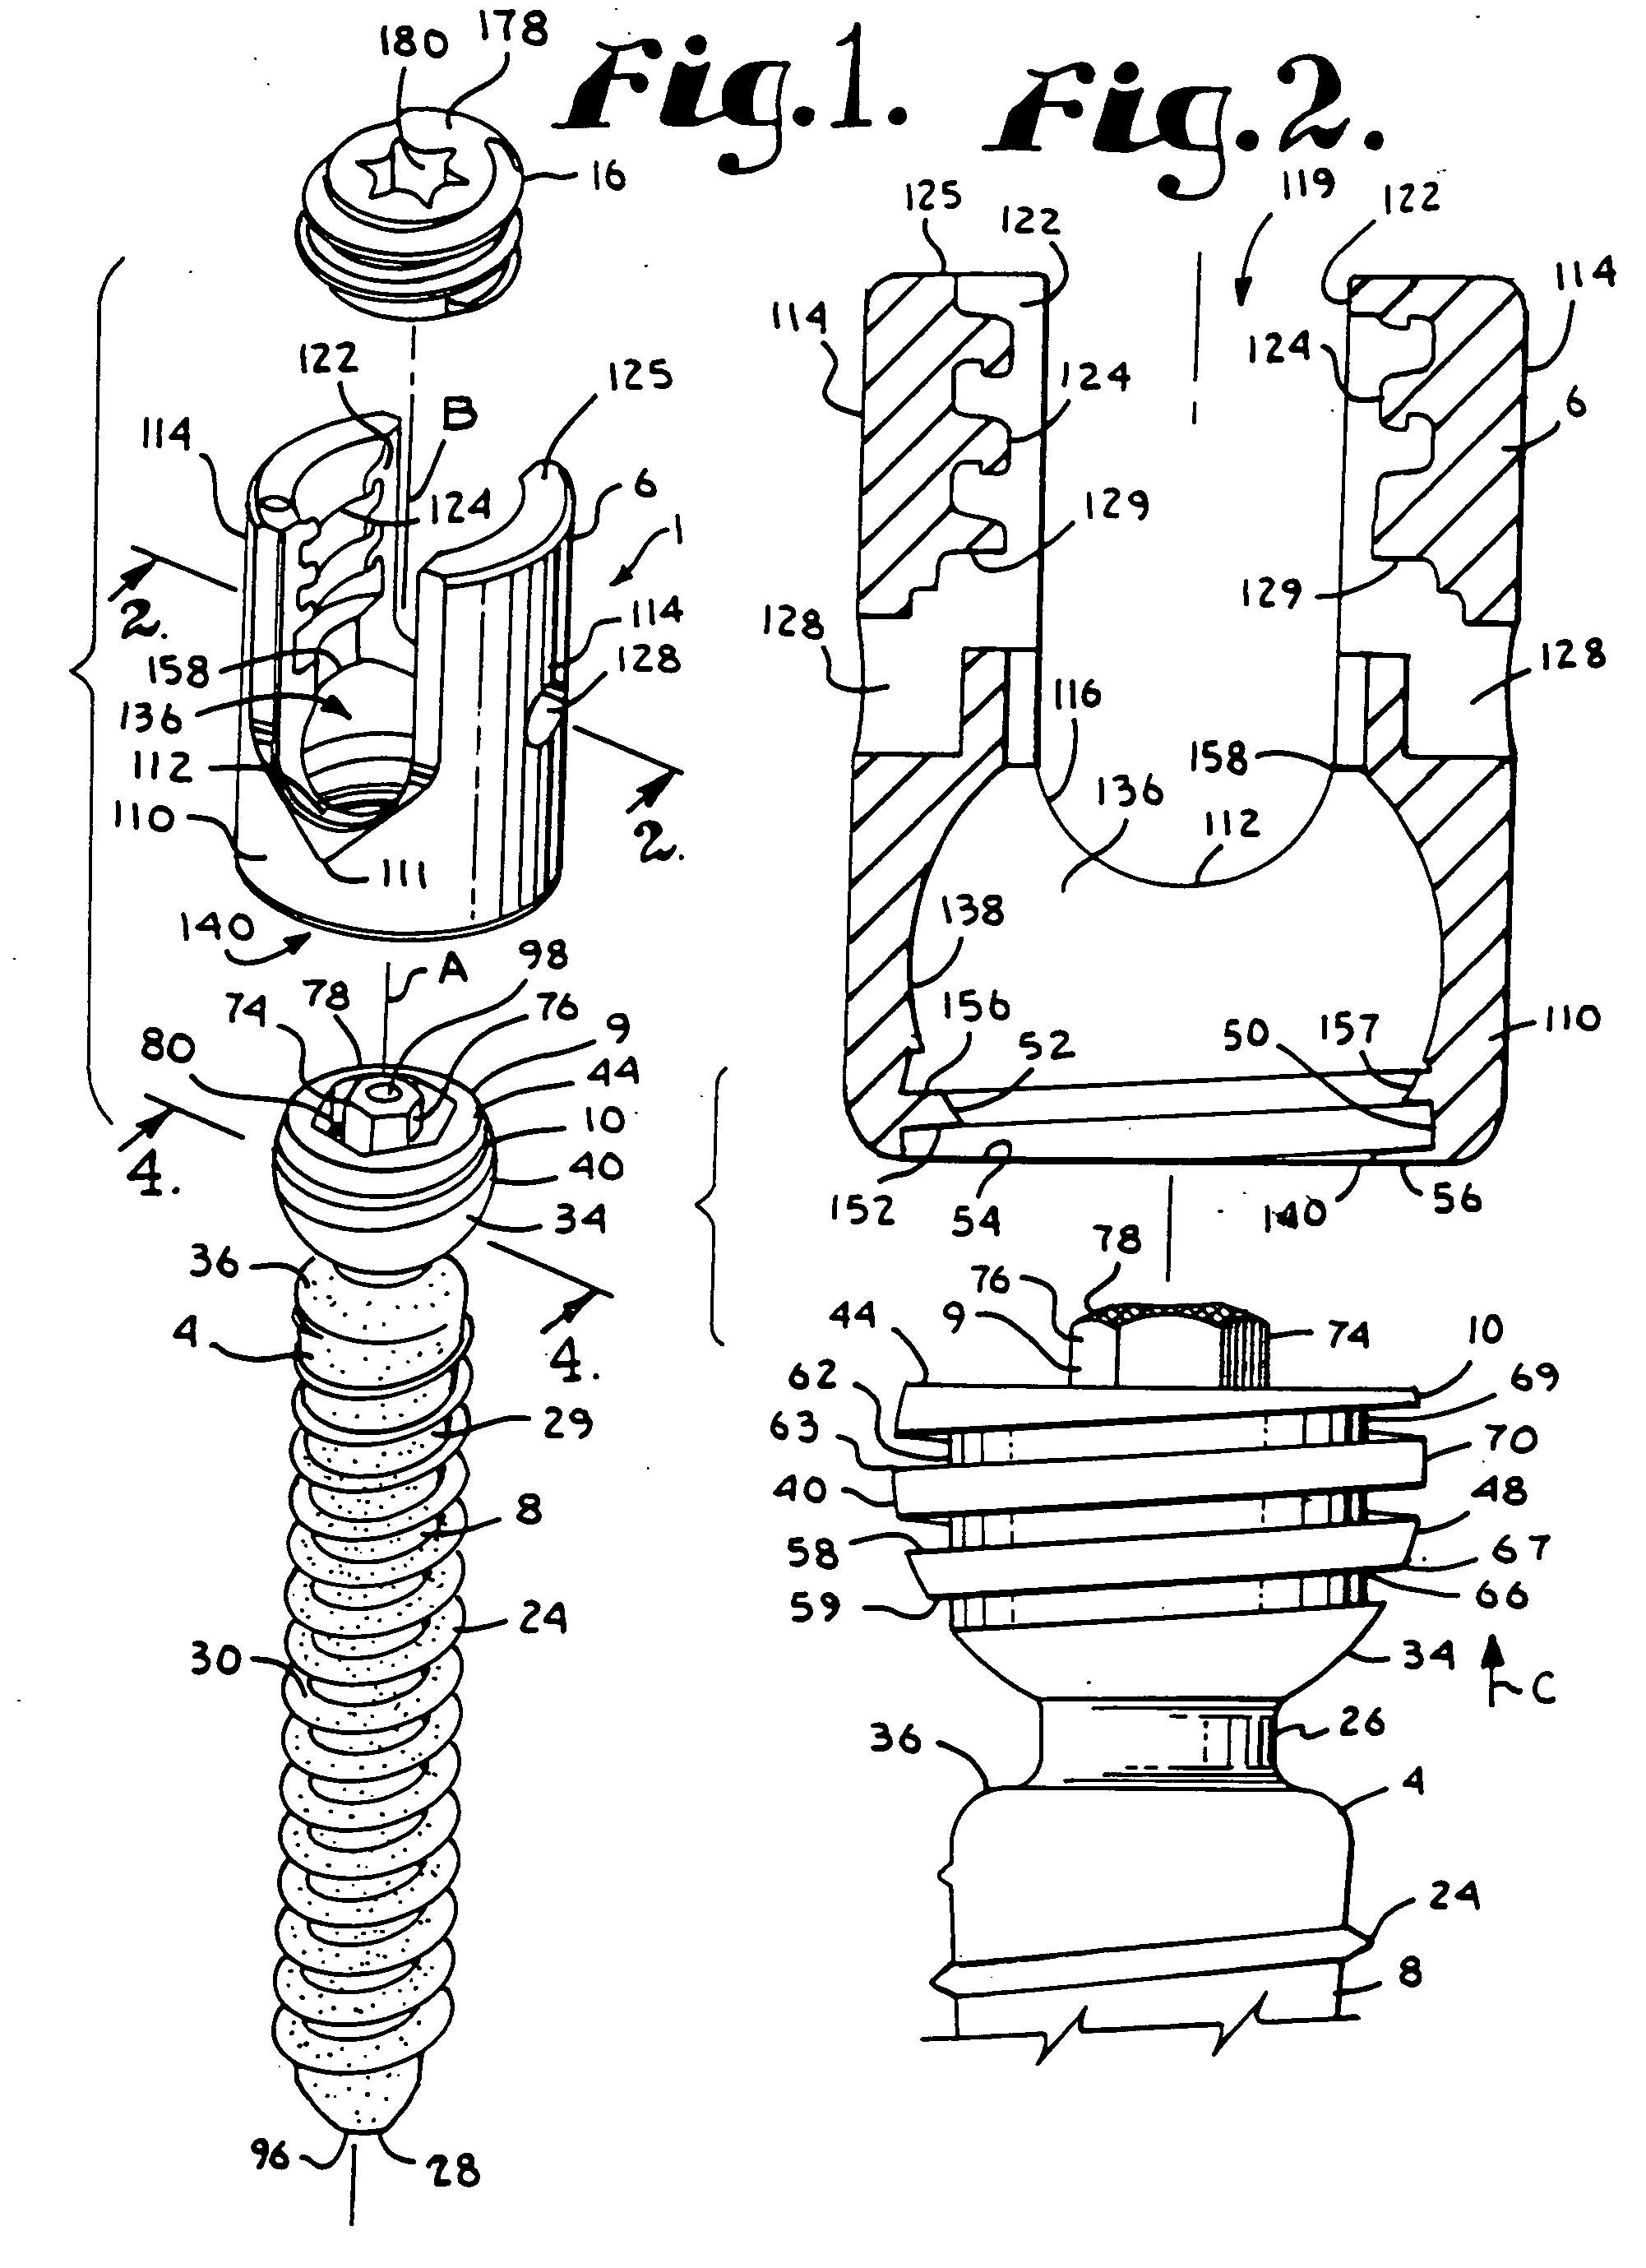 Dynamic stabilization medical implant assemblies and methods